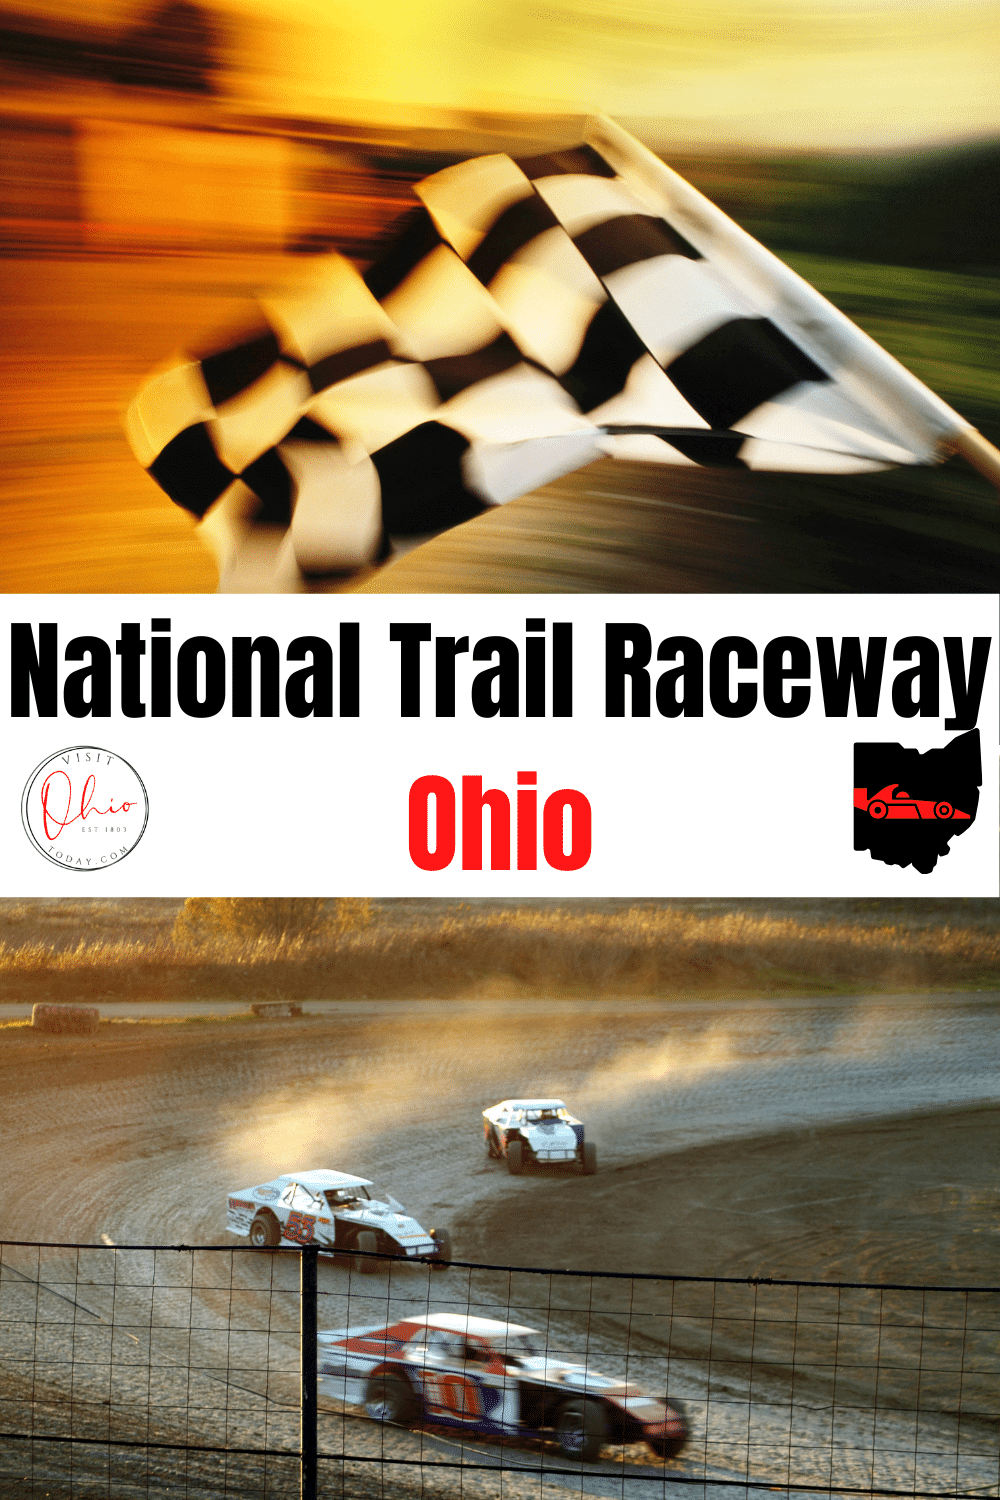 National Trail Raceway is based between the Ohio Cities of Kirkersville and Hebron. National Trail Raceway is located just off Route 40 and the race track is just 30 minutes east of Columbus Ohio. | National Trail Raceway | Racing In Ohio | Licking County